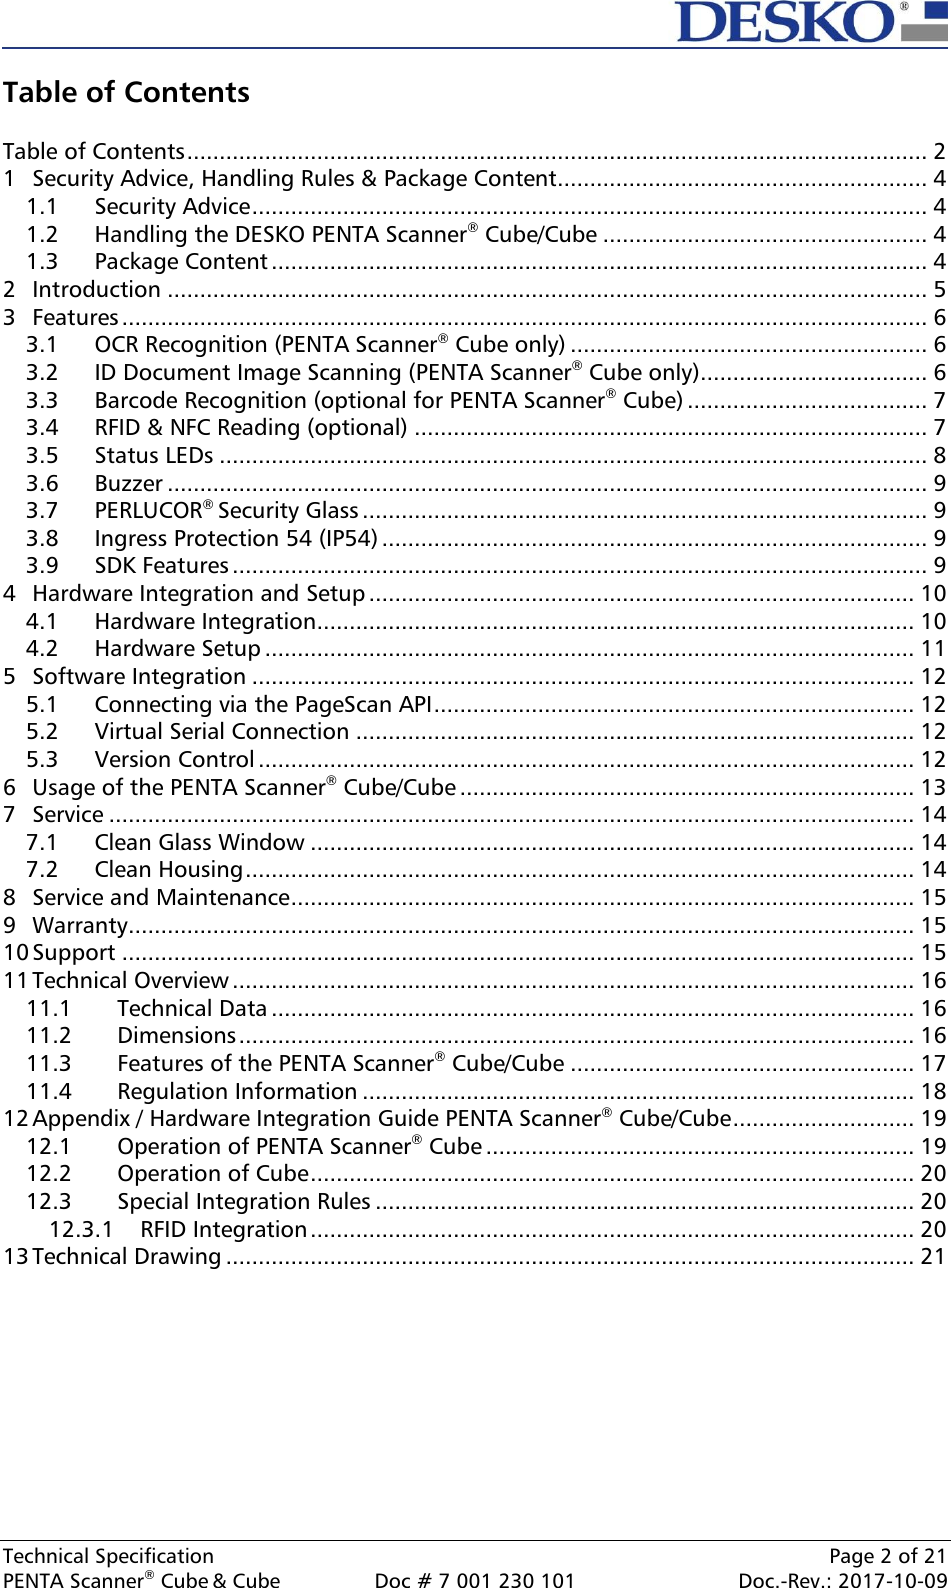  Technical Specification    Page 2 of 21 PENTA Scanner® Cube &amp; Cube  Doc # 7 001 230 101  Doc.-Rev.: 2017-10-09    Table of Contents  Table of Contents .................................................................................................................. 2 1 Security Advice, Handling Rules &amp; Package Content ......................................................... 4 1.1 Security Advice ........................................................................................................ 4 1.2 Handling the DESKO PENTA Scanner® Cube/Cube .................................................. 4 1.3 Package Content ..................................................................................................... 4 2 Introduction ..................................................................................................................... 5 3 Features ............................................................................................................................ 6 3.1 OCR Recognition (PENTA Scanner® Cube only) ....................................................... 6 3.2 ID Document Image Scanning (PENTA Scanner® Cube only) ................................... 6 3.3 Barcode Recognition (optional for PENTA Scanner® Cube) ..................................... 7 3.4 RFID &amp; NFC Reading (optional) ............................................................................... 7 3.5 Status LEDs ............................................................................................................. 8 3.6 Buzzer ..................................................................................................................... 9 3.7 PERLUCOR® Security Glass ....................................................................................... 9 3.8 Ingress Protection 54 (IP54) .................................................................................... 9 3.9 SDK Features ........................................................................................................... 9 4 Hardware Integration and Setup .................................................................................... 10 4.1 Hardware Integration ............................................................................................ 10 4.2 Hardware Setup .................................................................................................... 11 5 Software Integration ...................................................................................................... 12 5.1 Connecting via the PageScan API .......................................................................... 12 5.2 Virtual Serial Connection ...................................................................................... 12 5.3 Version Control ..................................................................................................... 12 6 Usage of the PENTA Scanner® Cube/Cube ...................................................................... 13 7 Service ............................................................................................................................ 14 7.1 Clean Glass Window ............................................................................................. 14 7.2 Clean Housing ....................................................................................................... 14 8 Service and Maintenance ................................................................................................ 15 9 Warranty ......................................................................................................................... 15 10 Support .......................................................................................................................... 15 11 Technical Overview ......................................................................................................... 16 11.1 Technical Data ................................................................................................... 16 11.2 Dimensions ........................................................................................................ 16 11.3 Features of the PENTA Scanner® Cube/Cube ..................................................... 17 11.4 Regulation Information ..................................................................................... 18 12 Appendix / Hardware Integration Guide PENTA Scanner® Cube/Cube ............................ 19 12.1 Operation of PENTA Scanner® Cube .................................................................. 19 12.2 Operation of Cube ............................................................................................. 20 12.3 Special Integration Rules ................................................................................... 20 12.3.1 RFID Integration ............................................................................................. 20 13 Technical Drawing .......................................................................................................... 21          